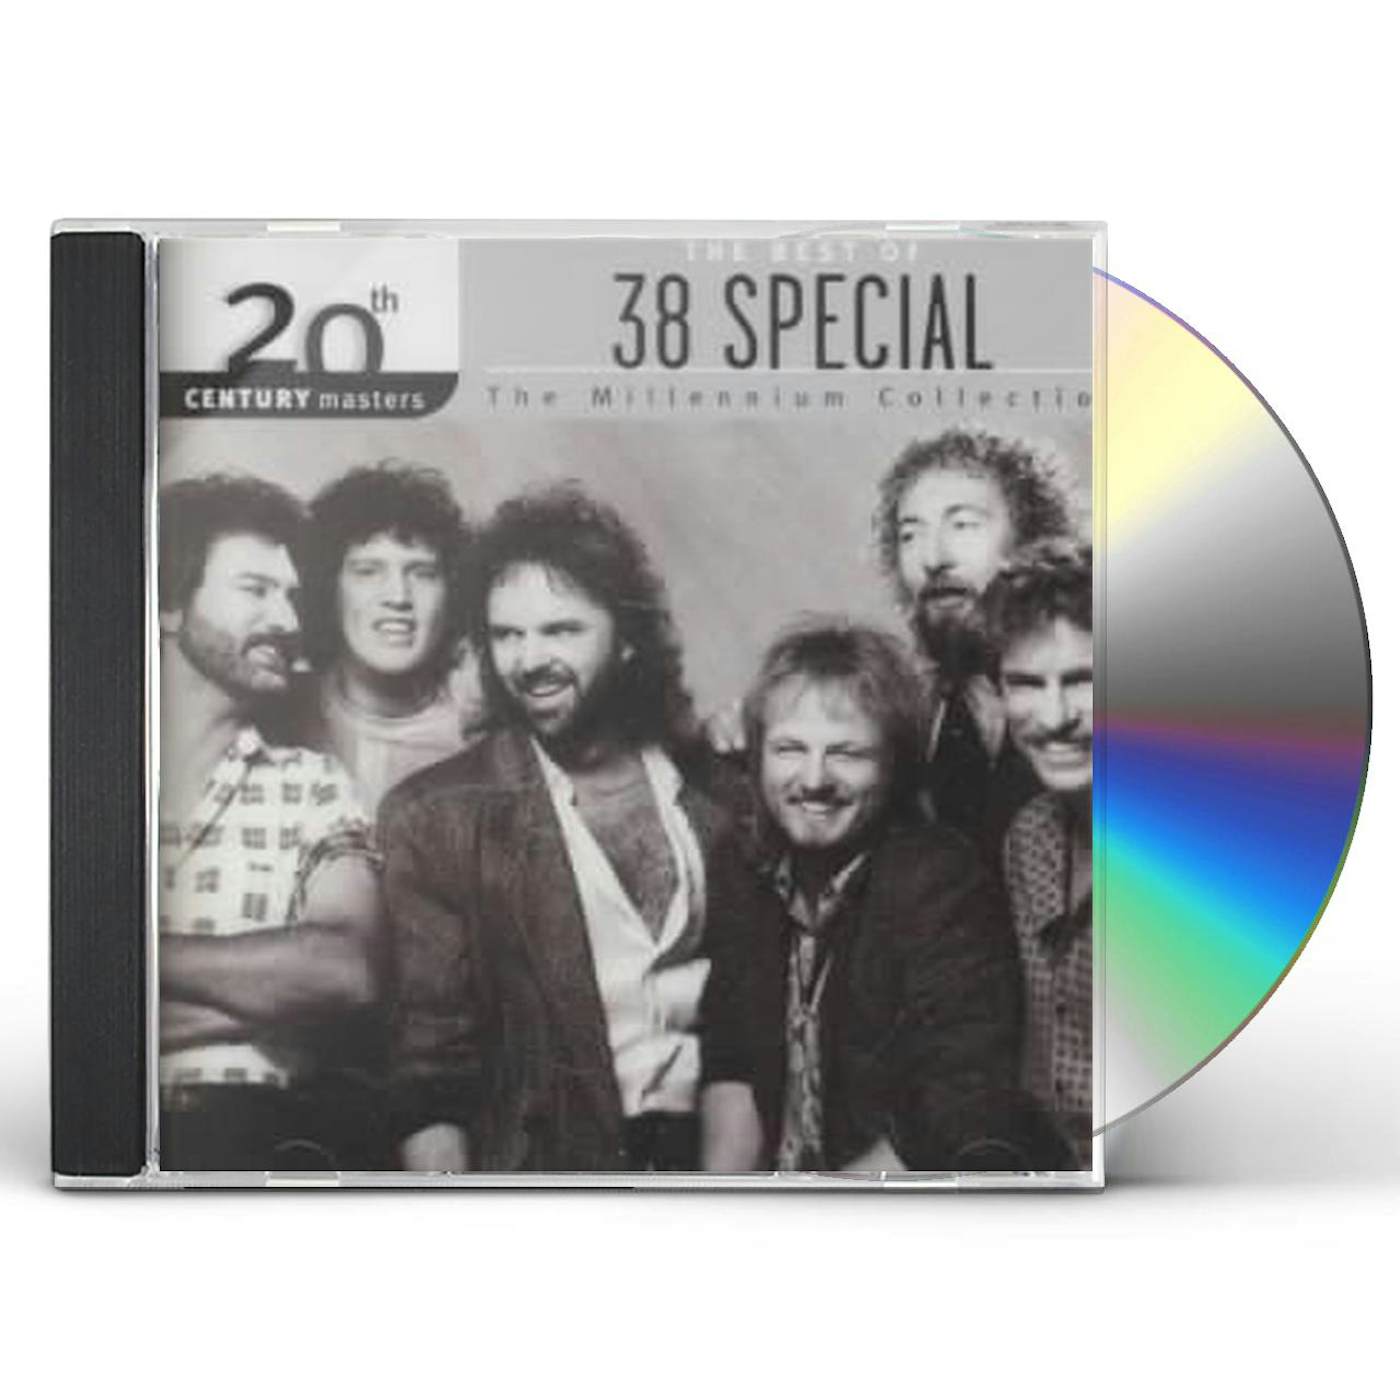 38 Special 20TH CENTURY: MILLENNIUM COLLECTION CD